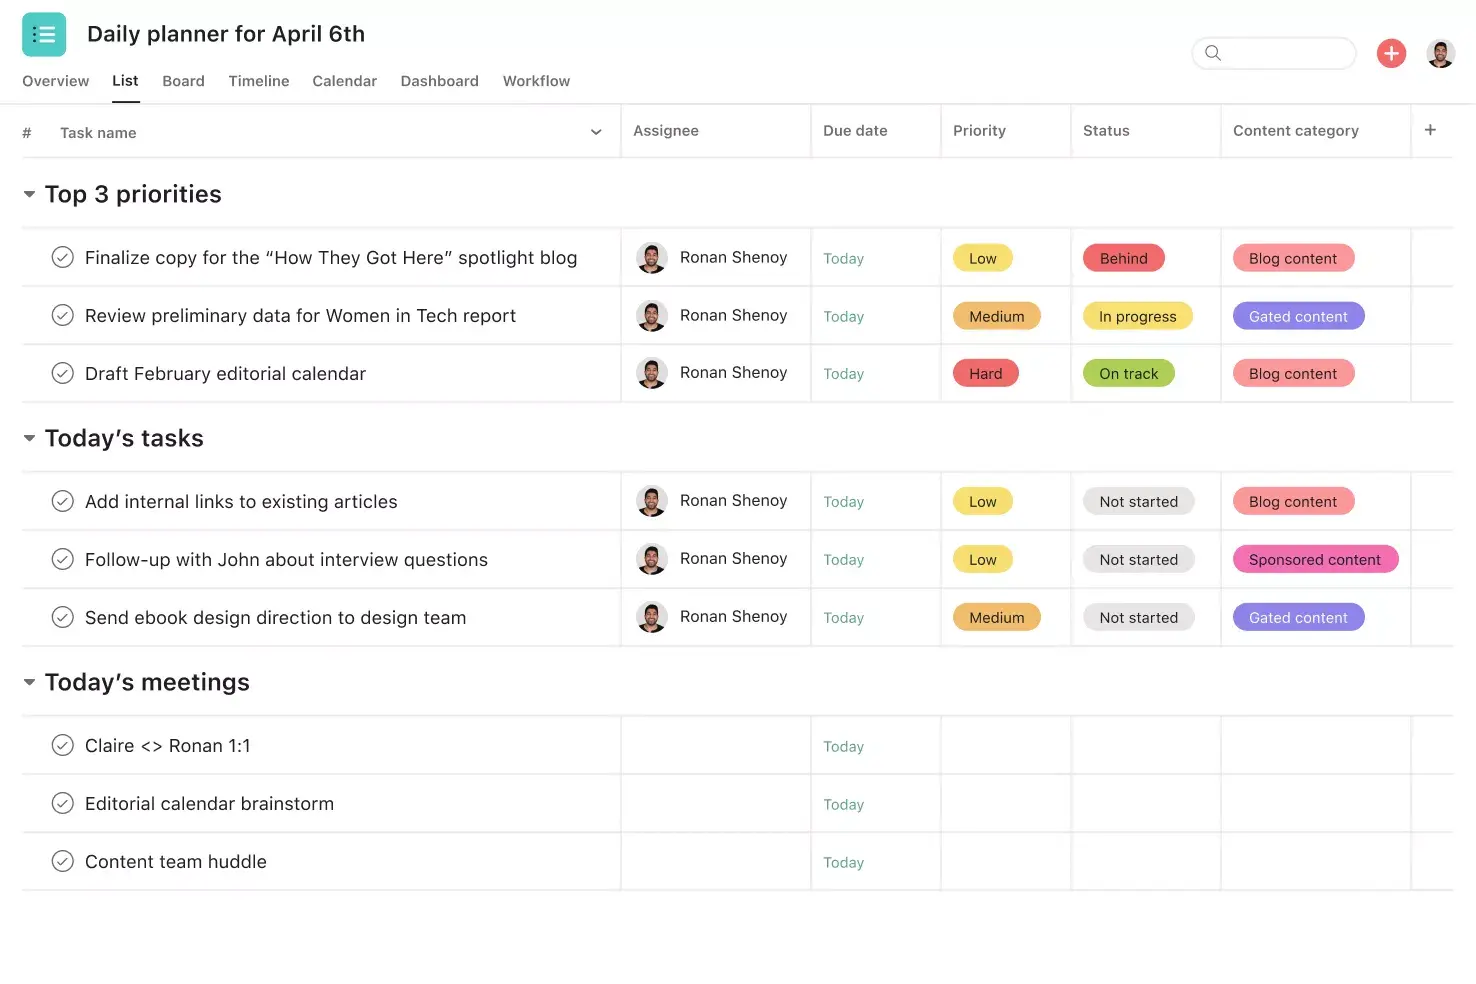 [Product ui] daily planner template image in Asana (list view)